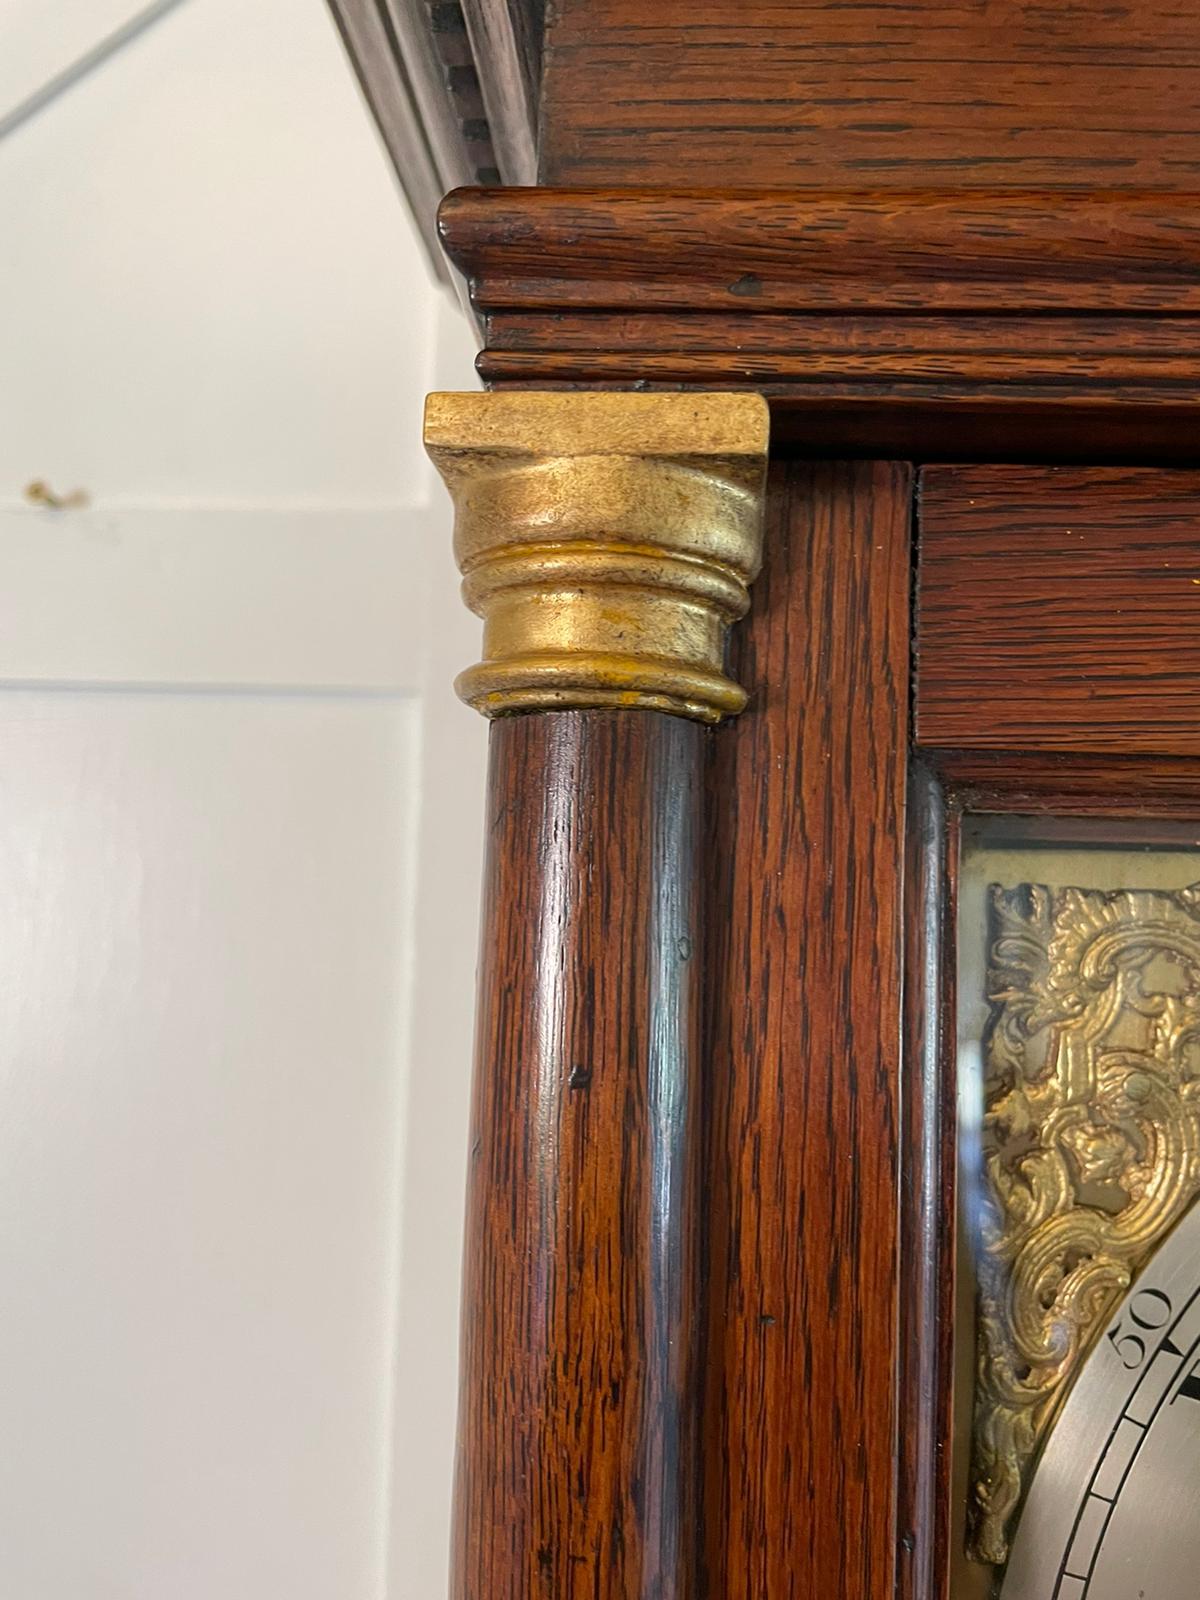 18th century quality antique oak brass face longcase clock by Benjamin Reeves, Lamberhurst 
having a quality square brass dial with original hands, 30 hour bird cage movement striking on the hour and half hour, original weight and pendulum. The